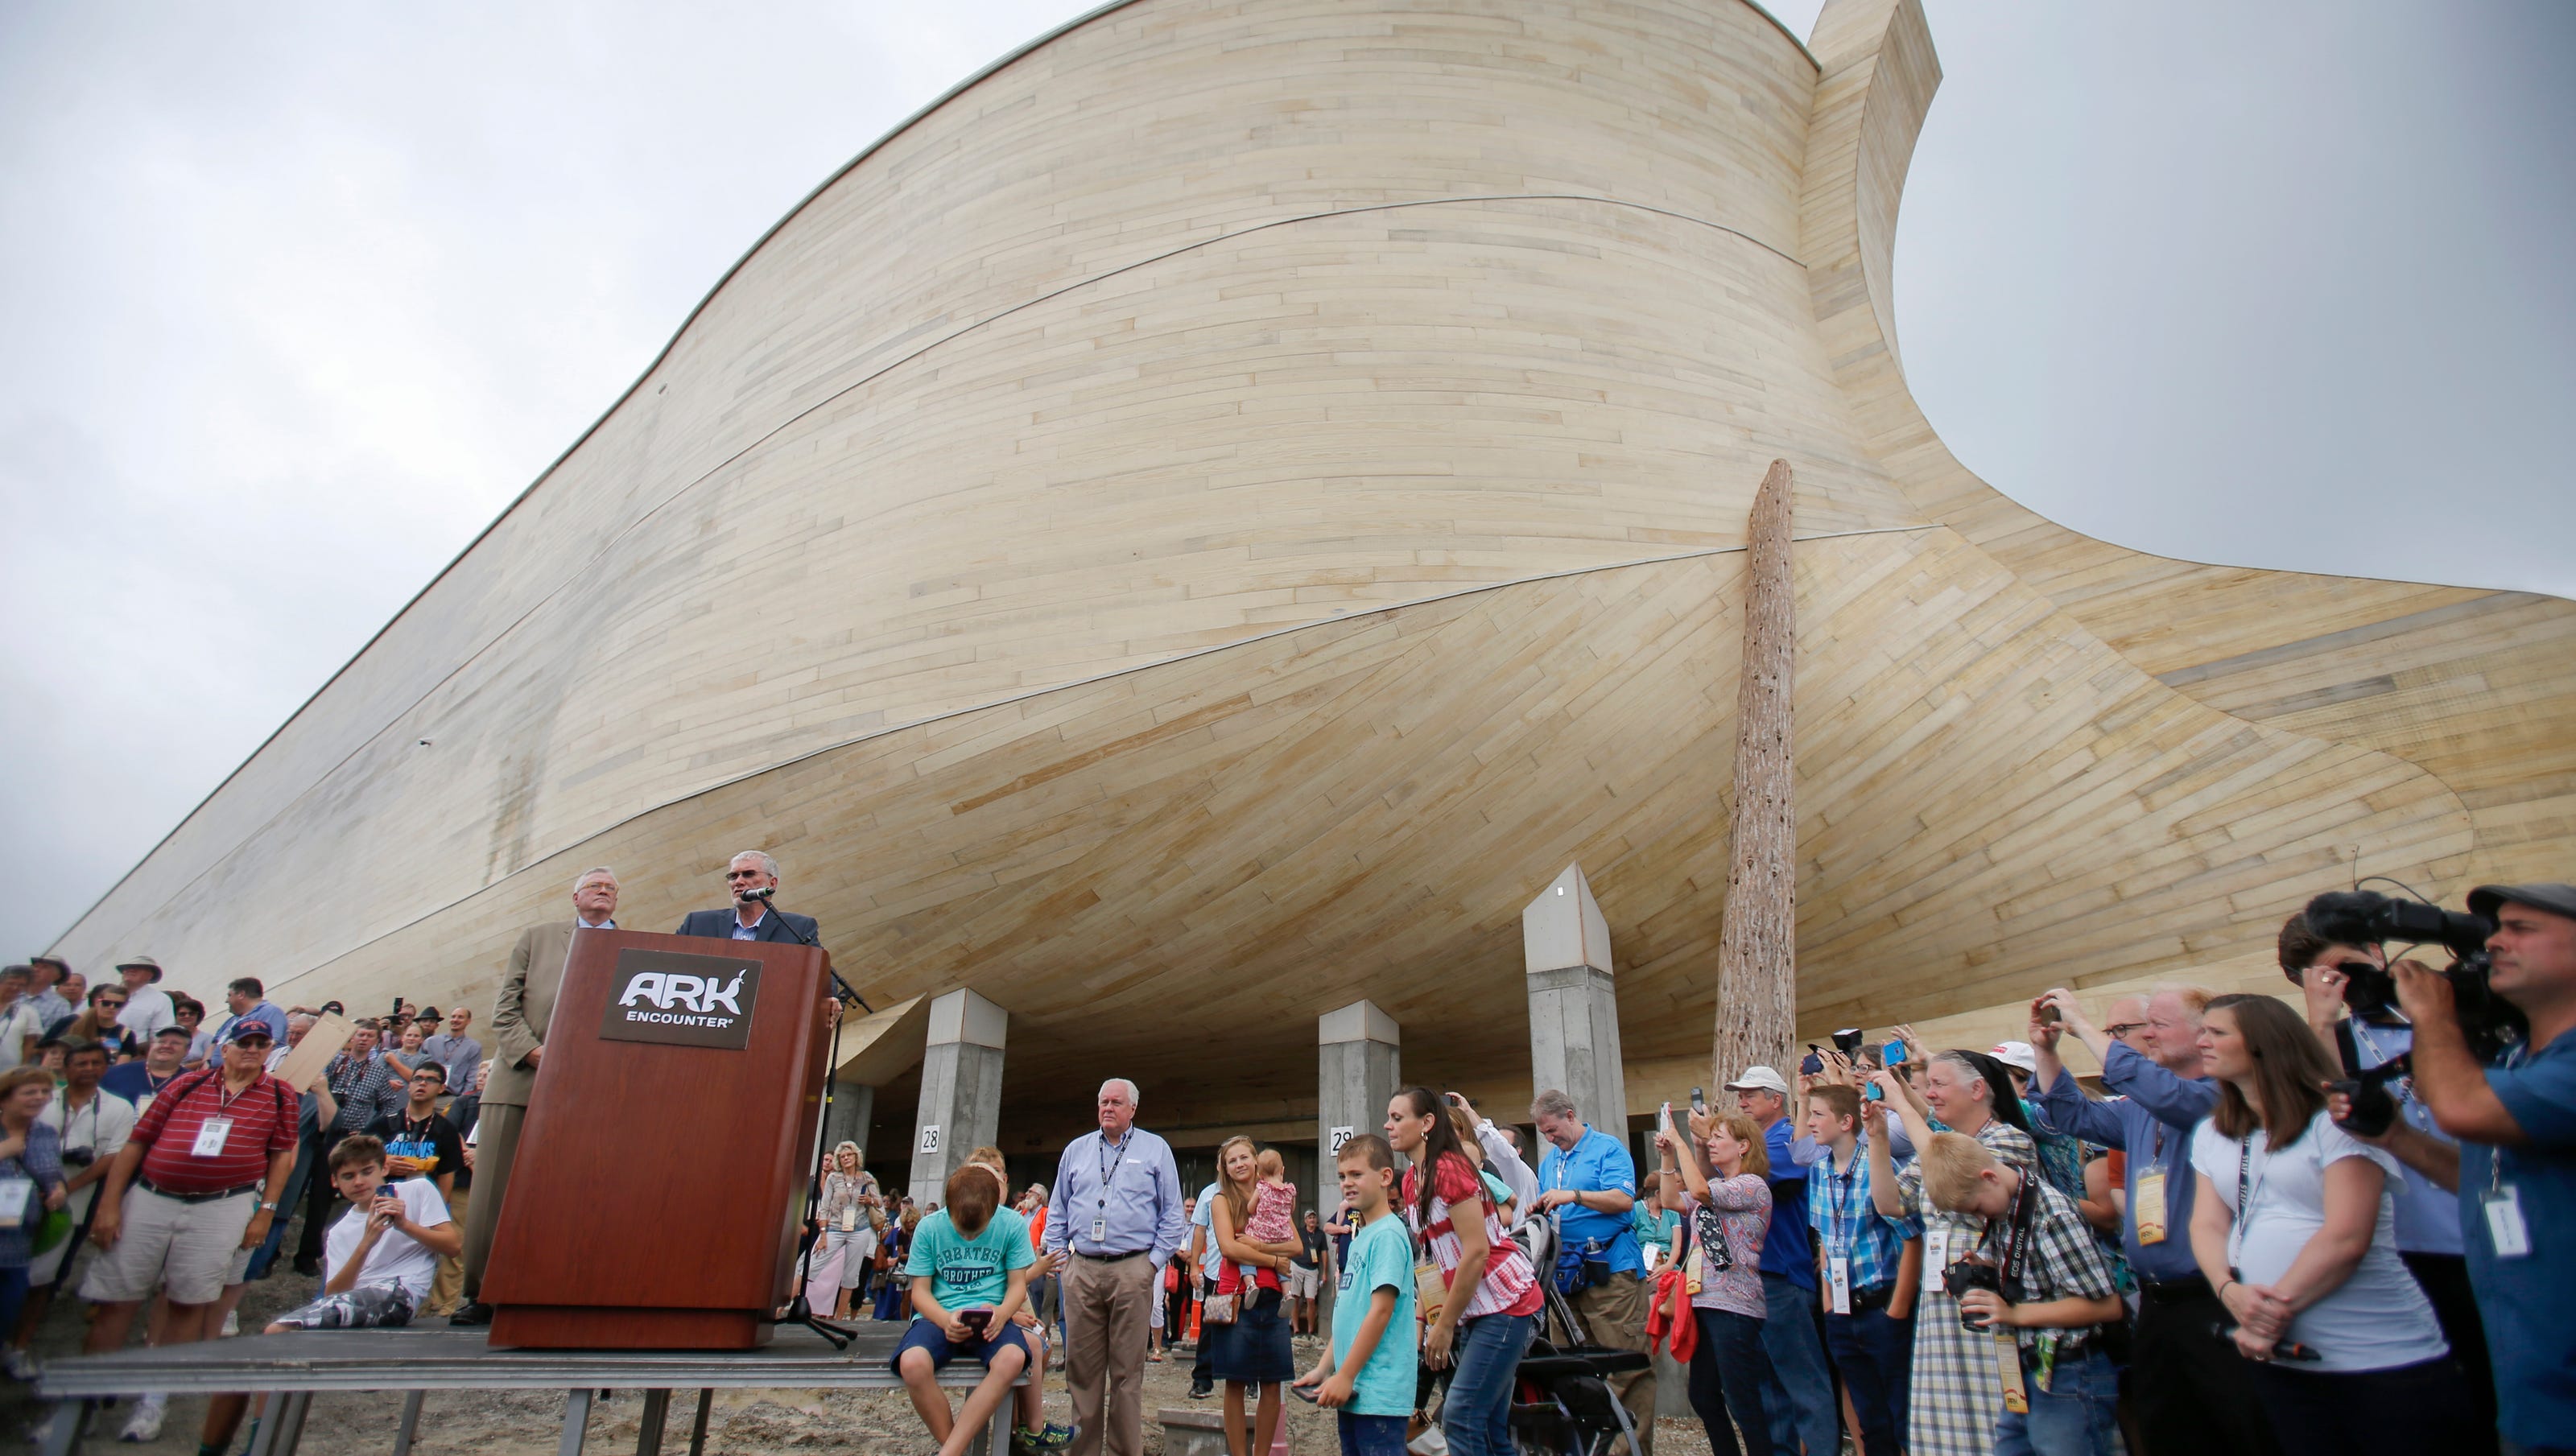 7-things-i-believe-after-my-ark-encounter-visit